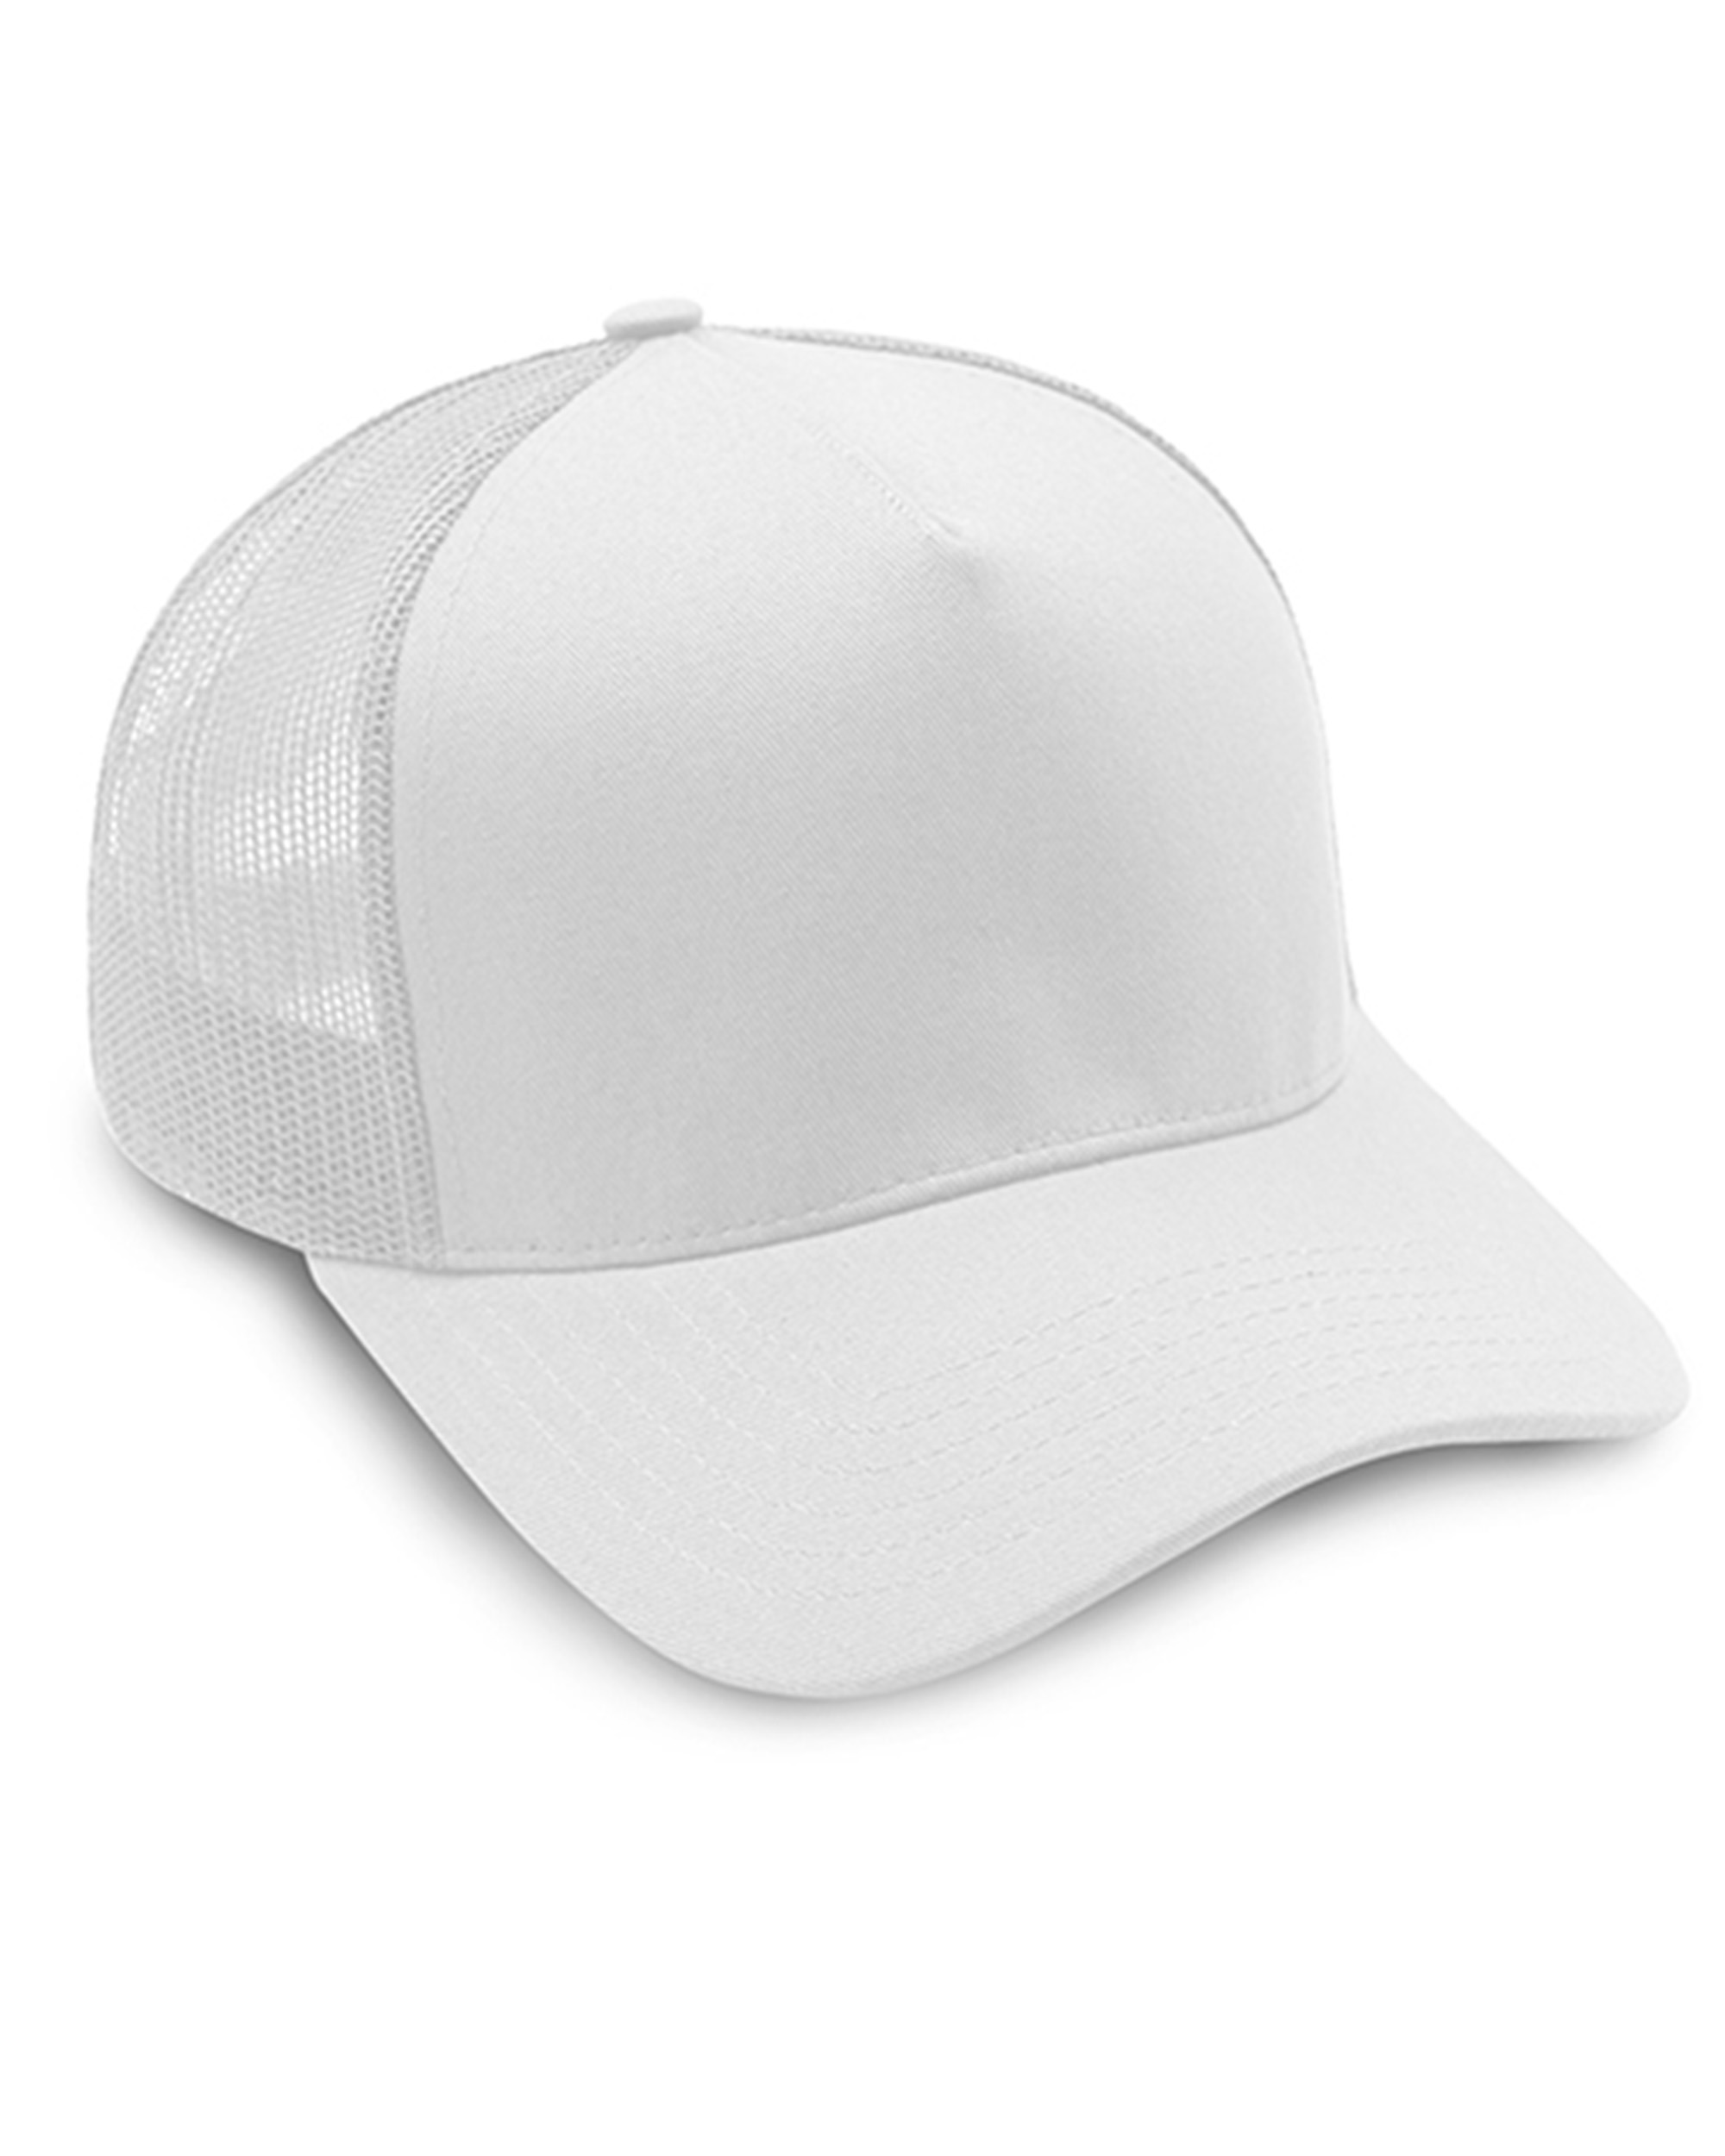 EastWest Embroidery 8540 Deluxe 5 Panel Constructed Cotton Twill Pro Cap